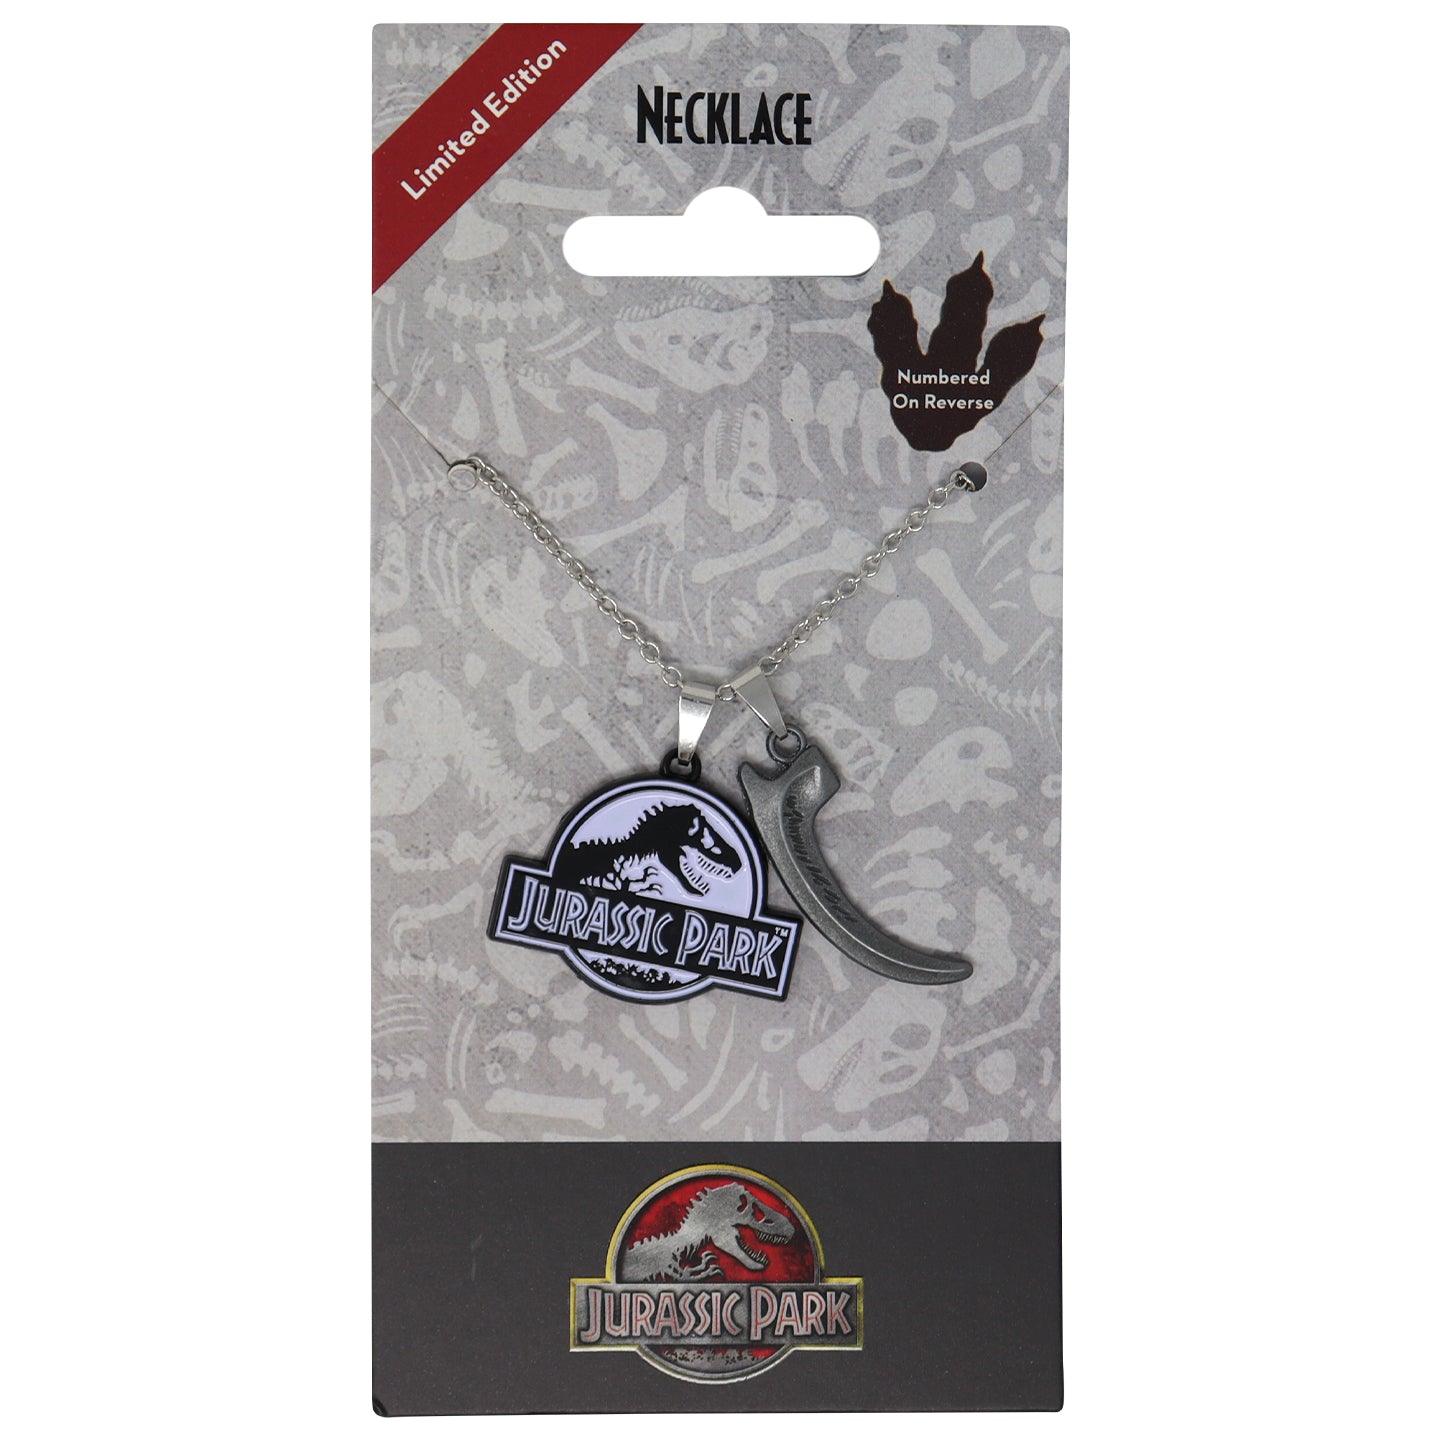 Jurassic Park Limited Edition Unisex Necklace